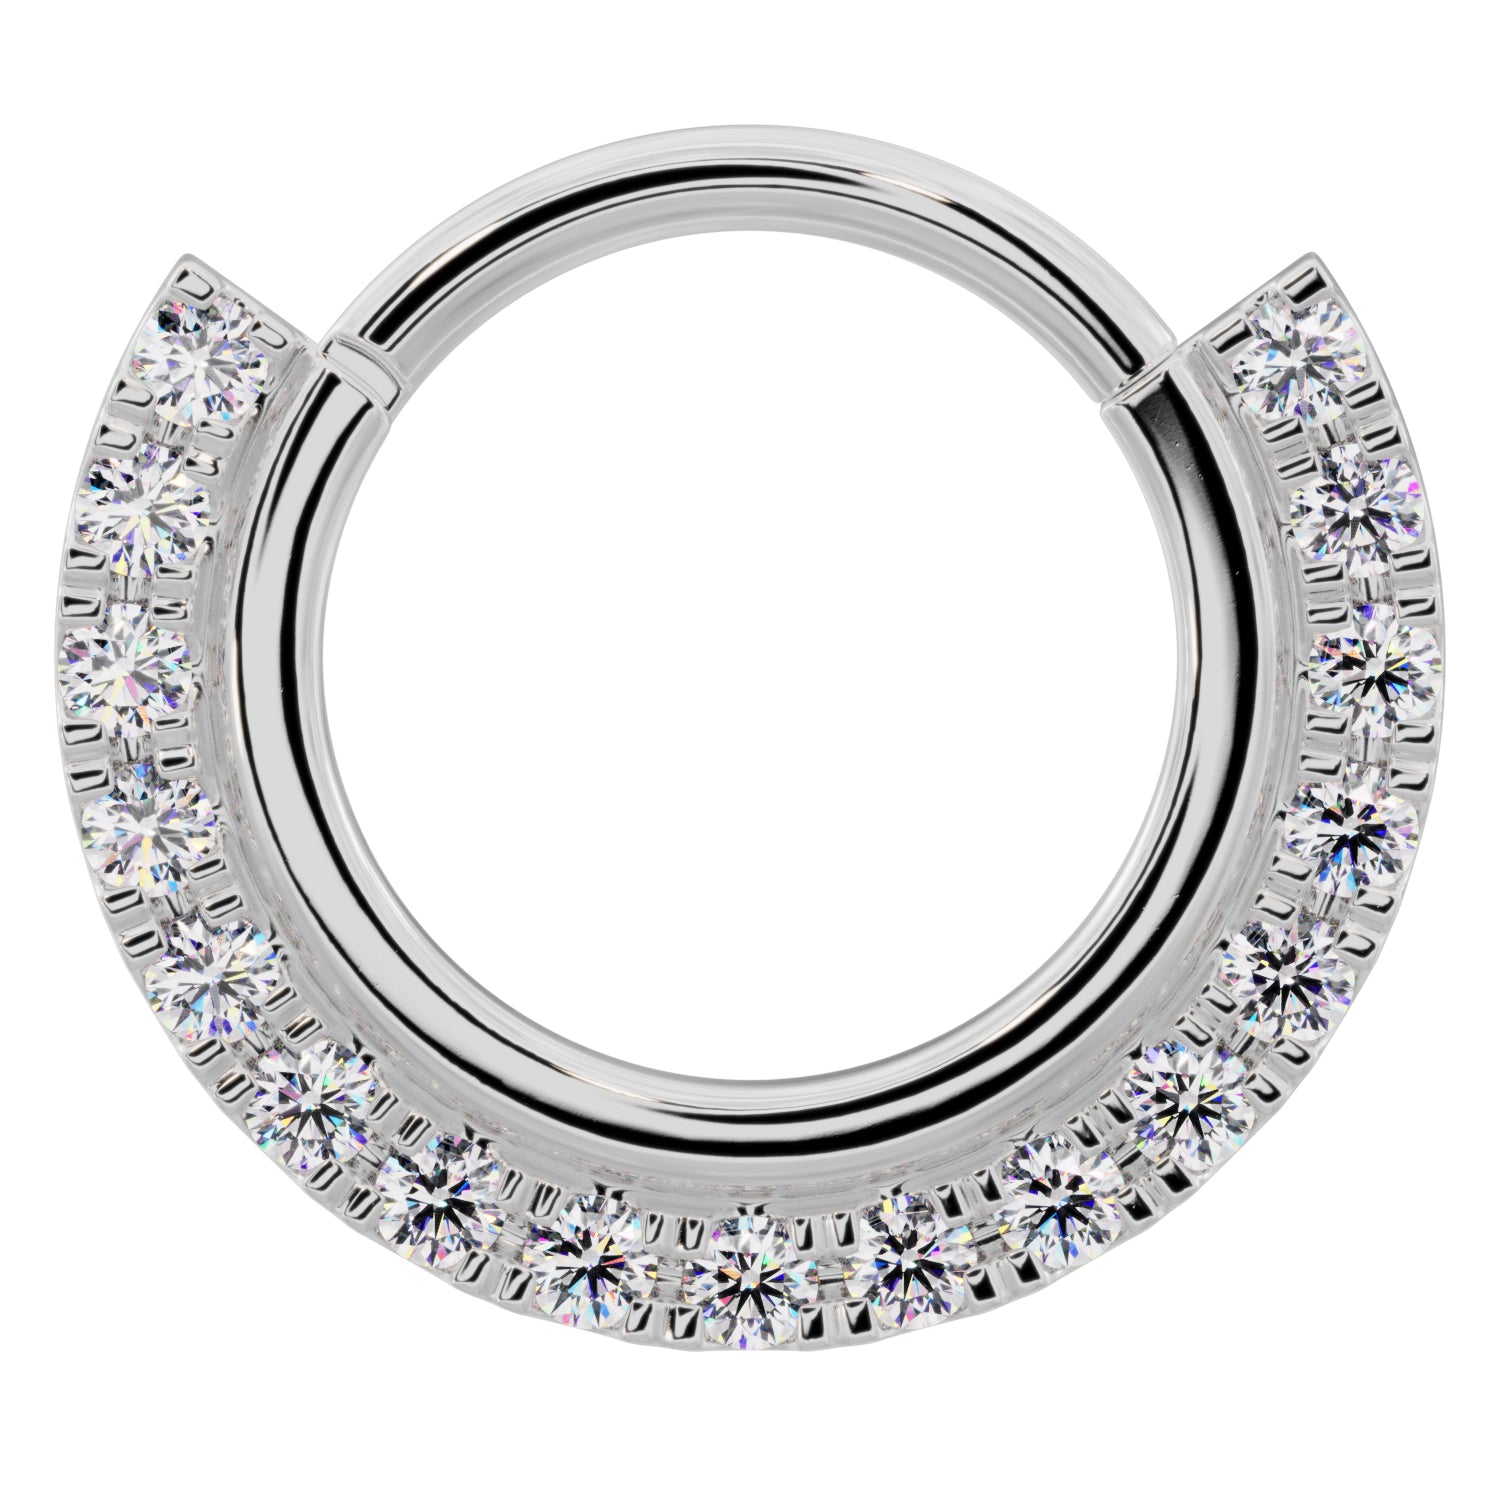 Gold Band and Diamonds Clicker 14k Gold Clicker Ring Hoop-14K White Gold   14G (1.6mm)   5 8